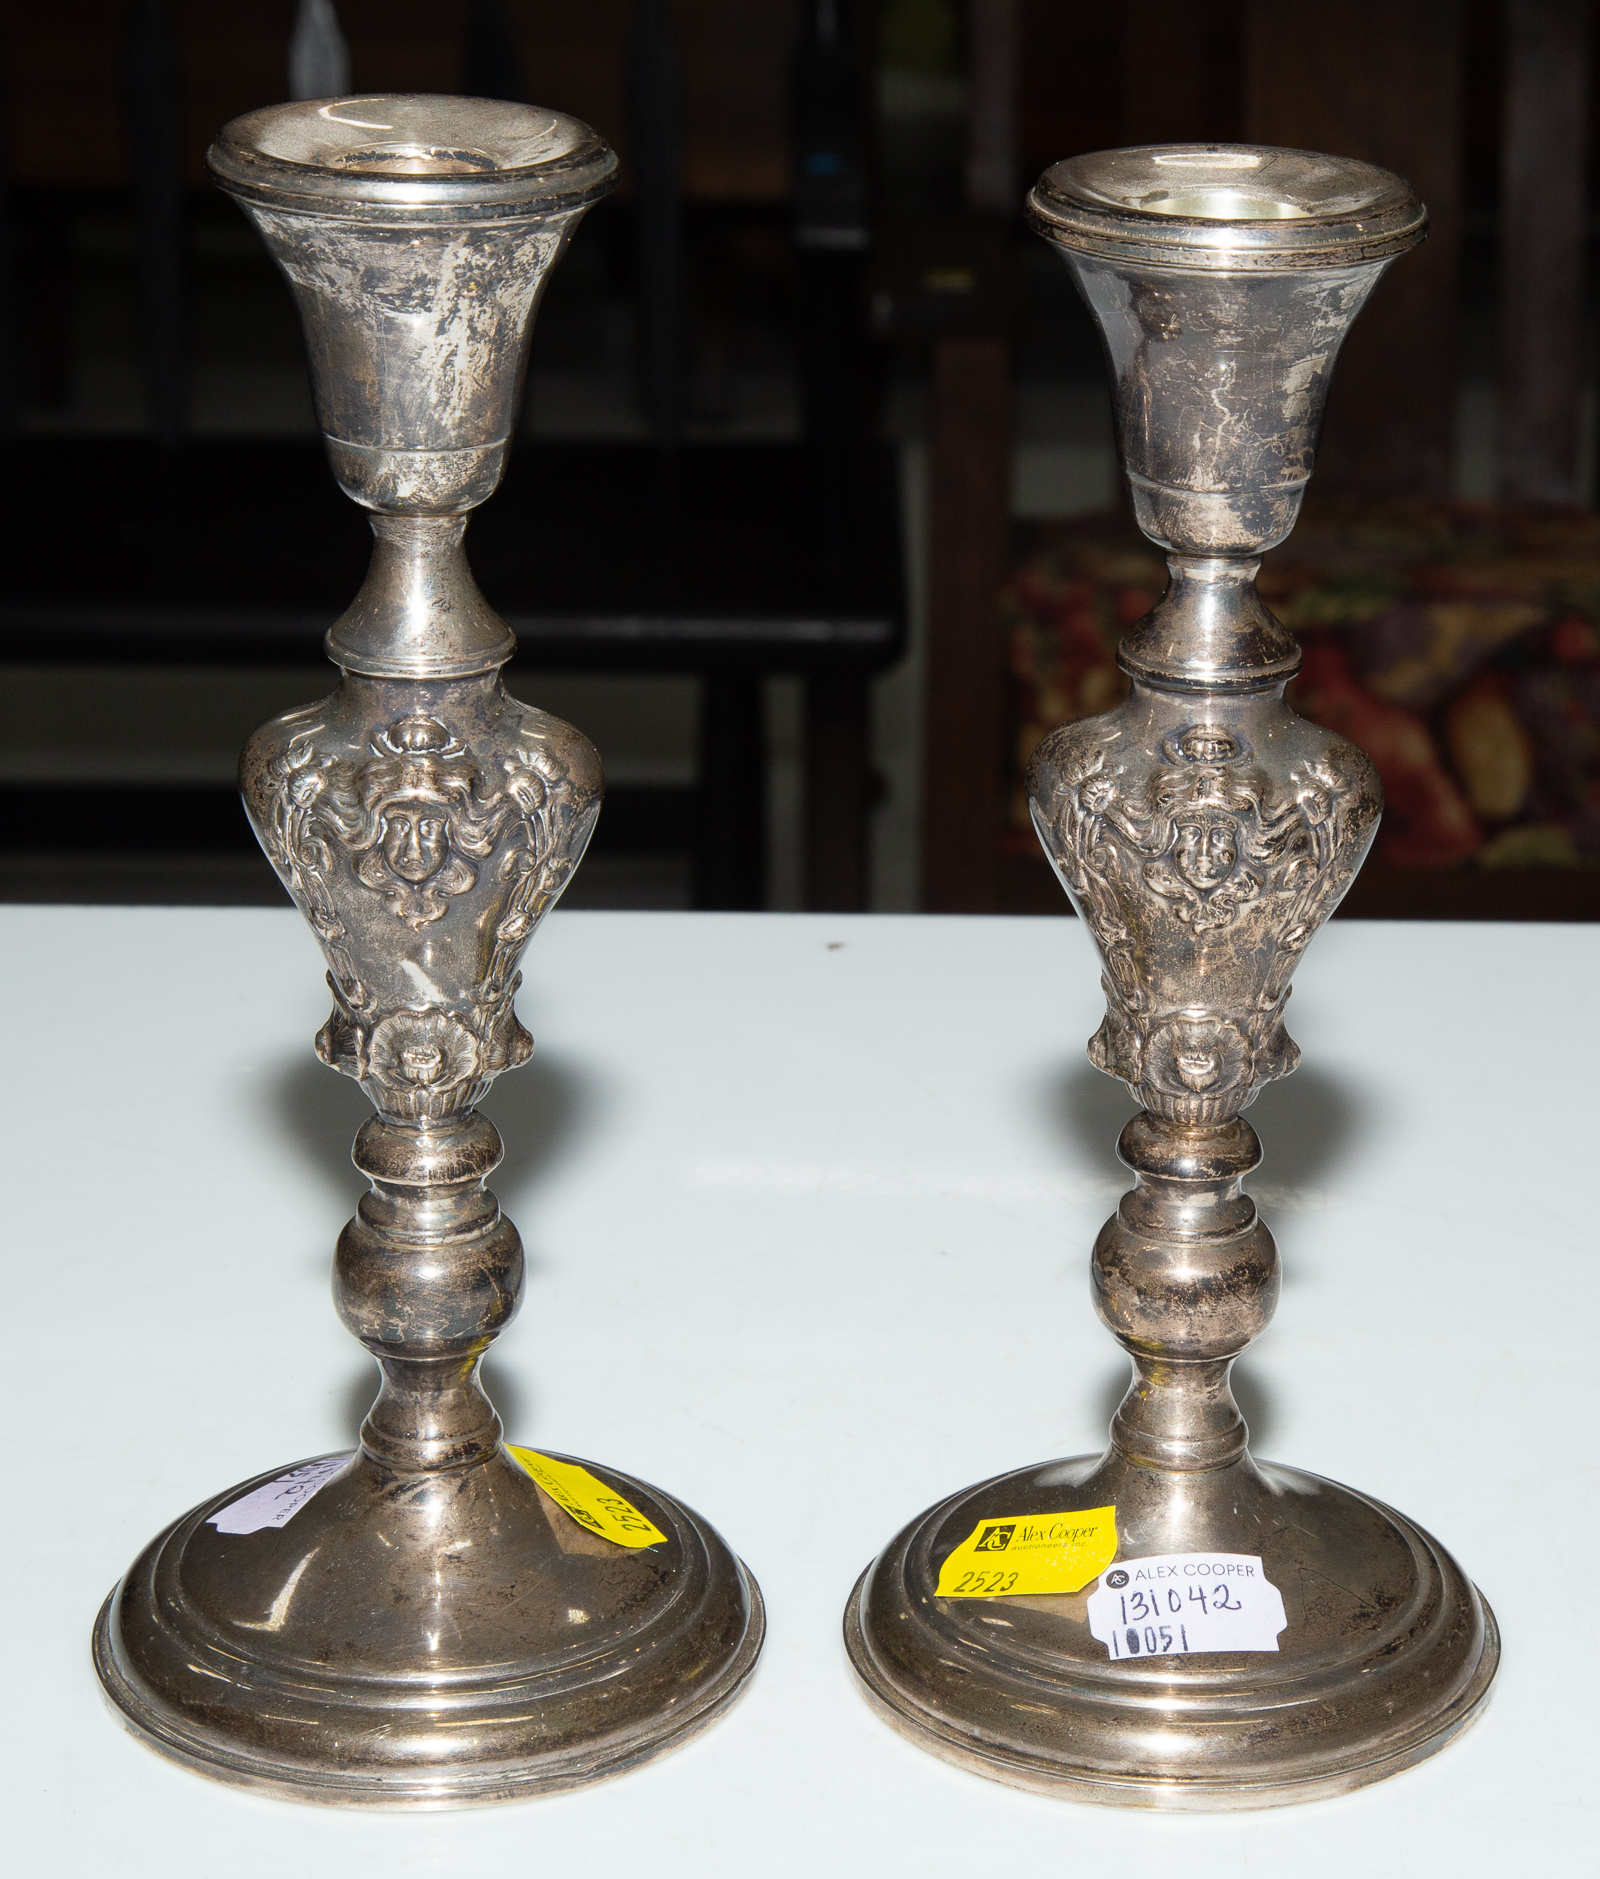 PAIR STERLING WEIGHTED CANDLESTICKS